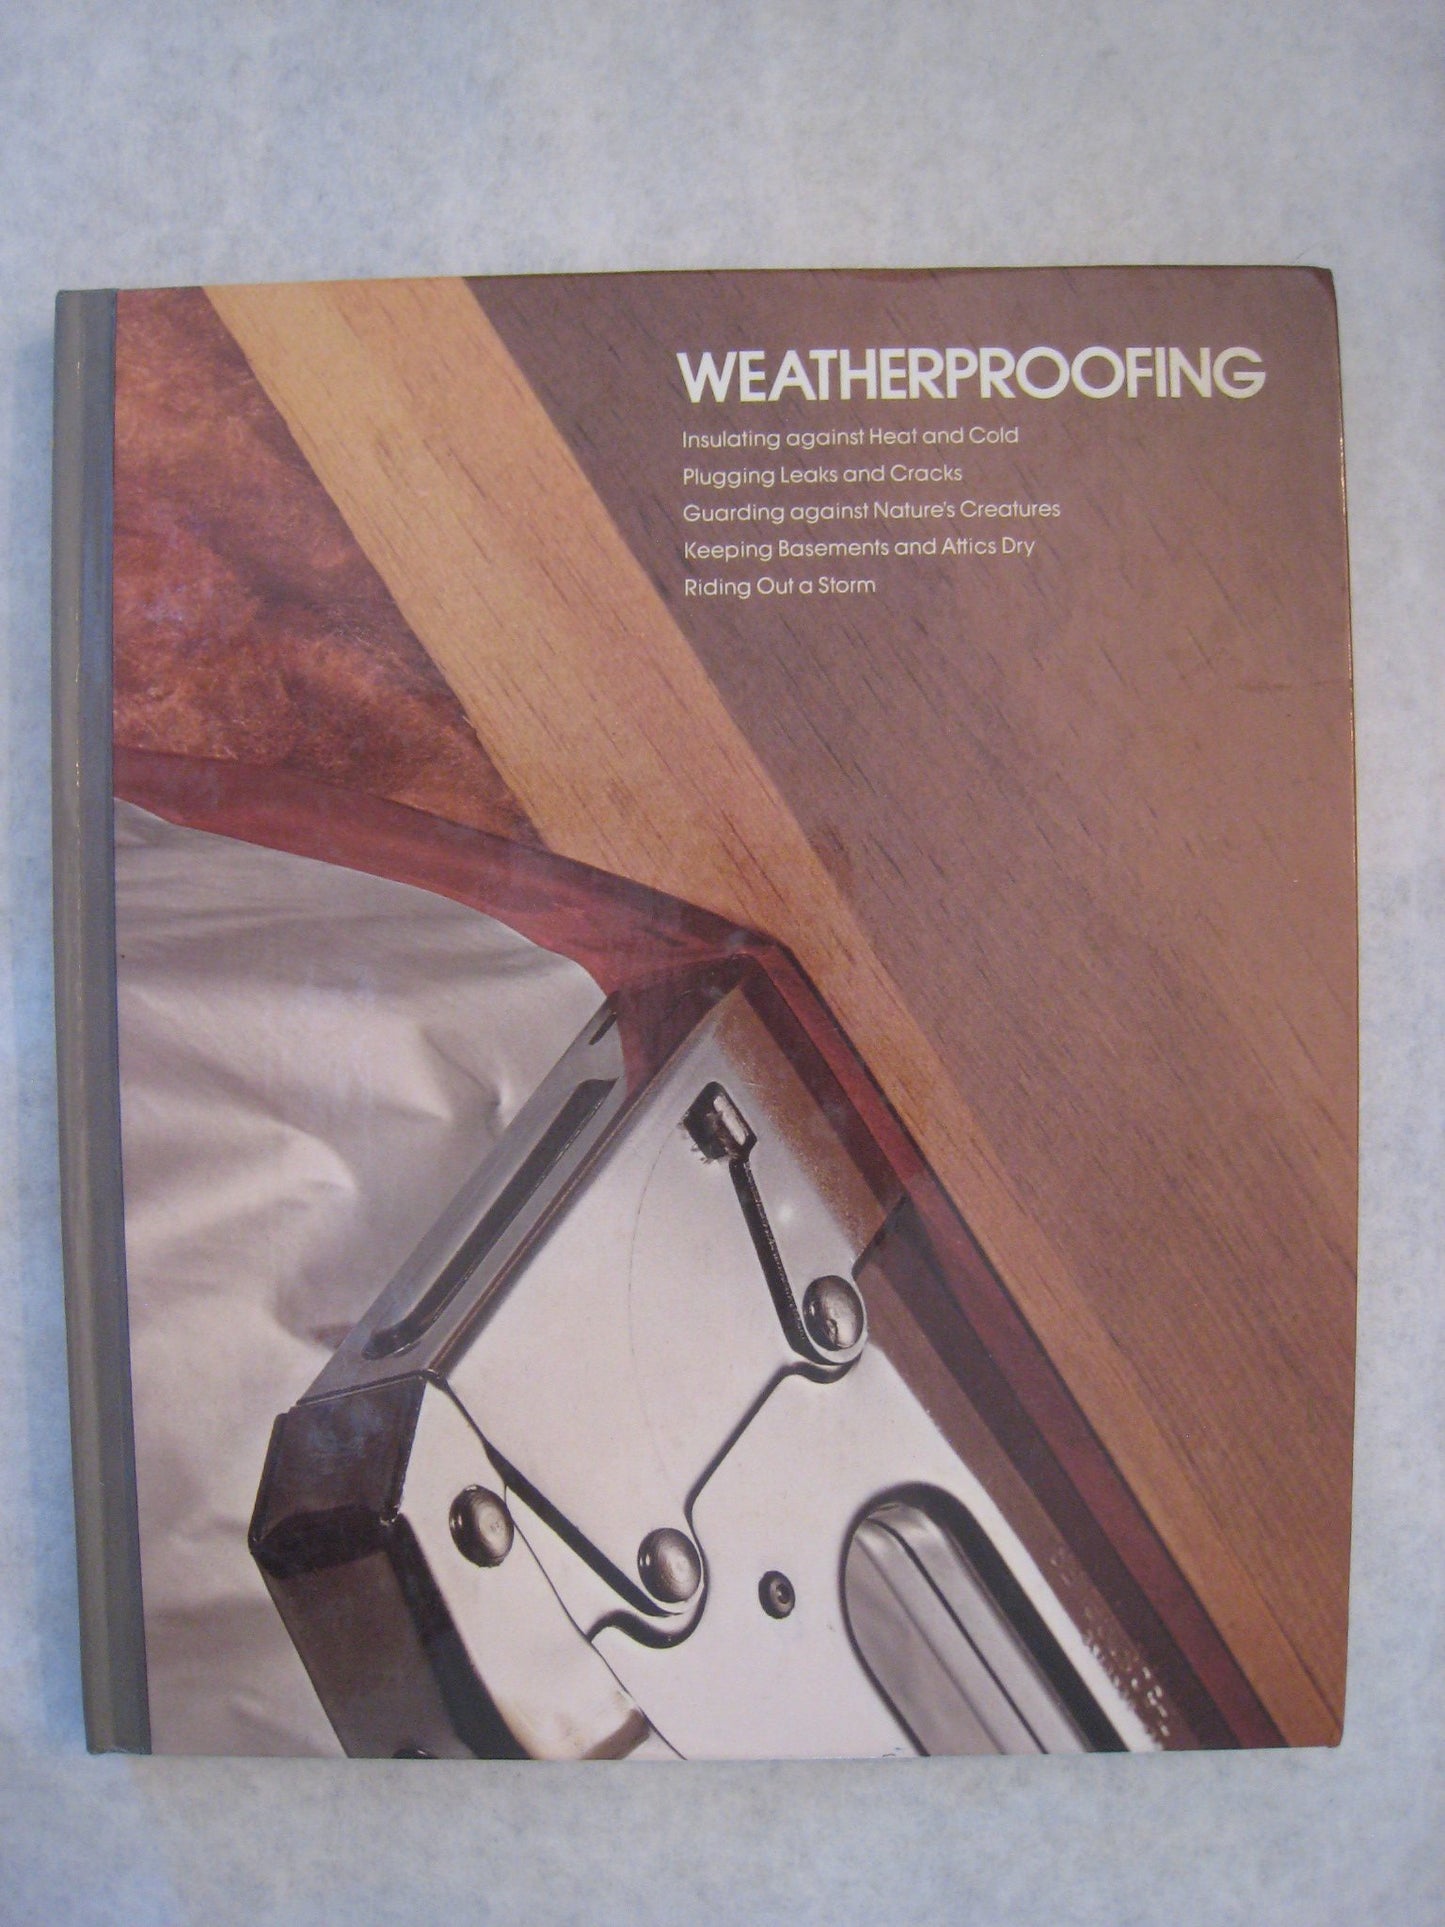 Weatherproofing [Hardcover] Time Life Books